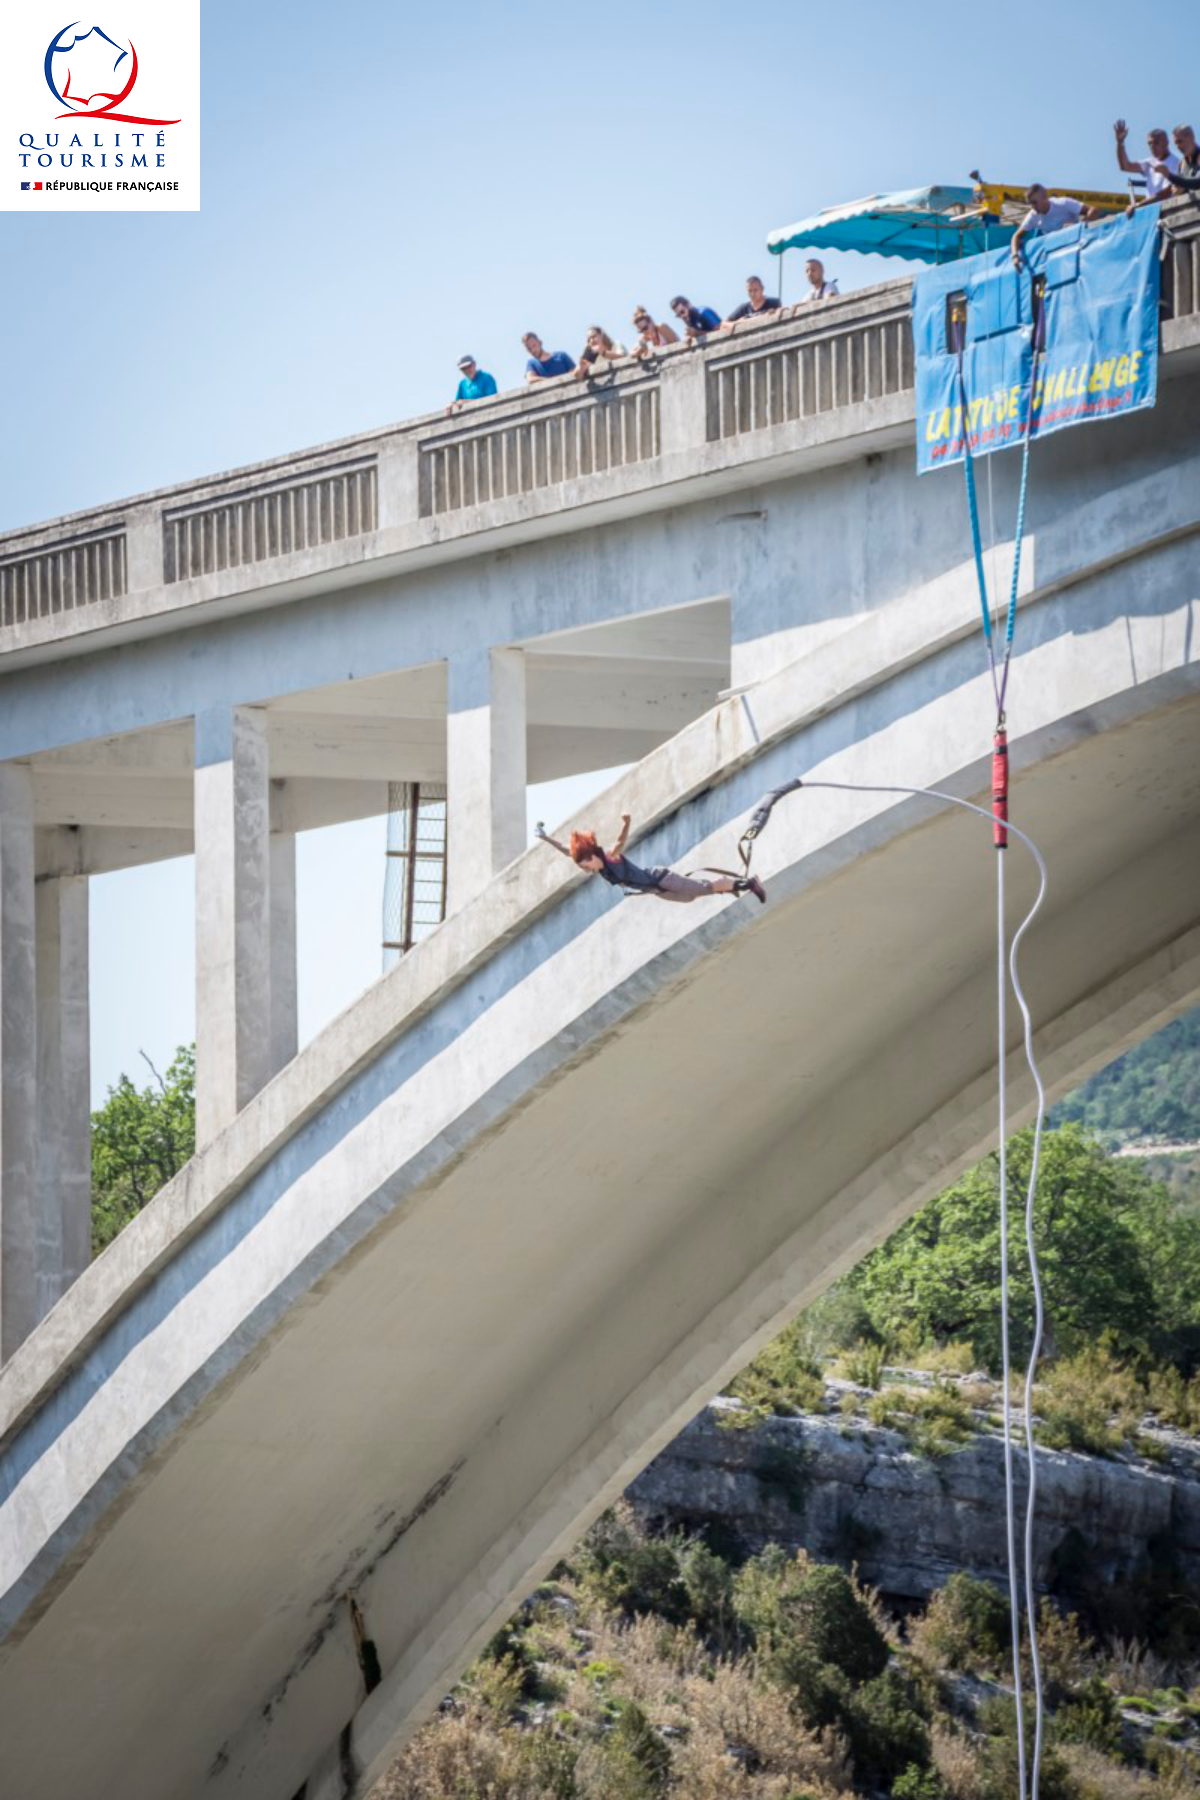 Photo Bungee jumping from the Artuby Bridge